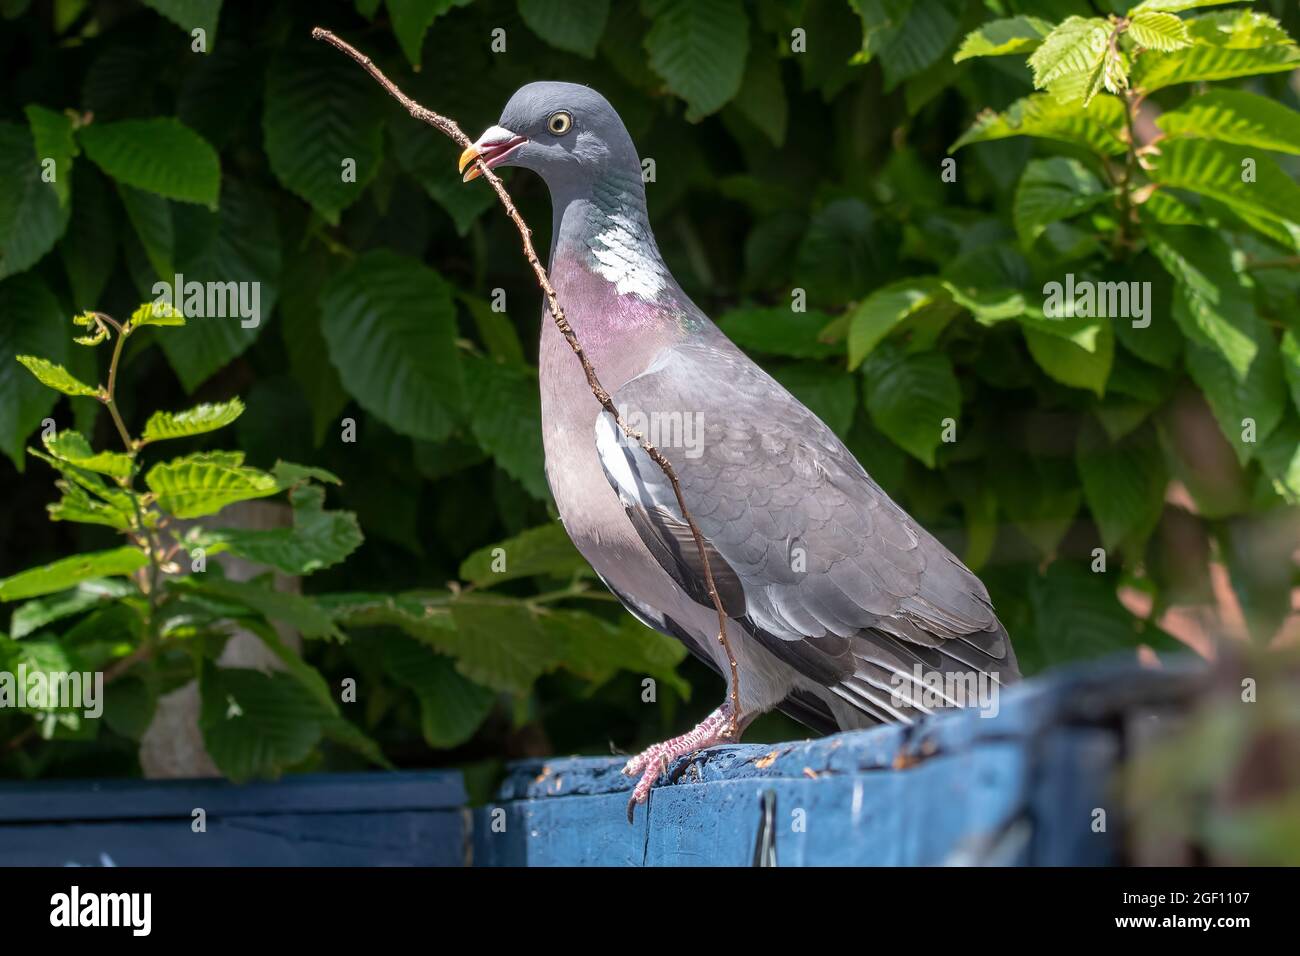 Common wood pigeon perched on a garden fence with nesting material in its beak. Stock Photo